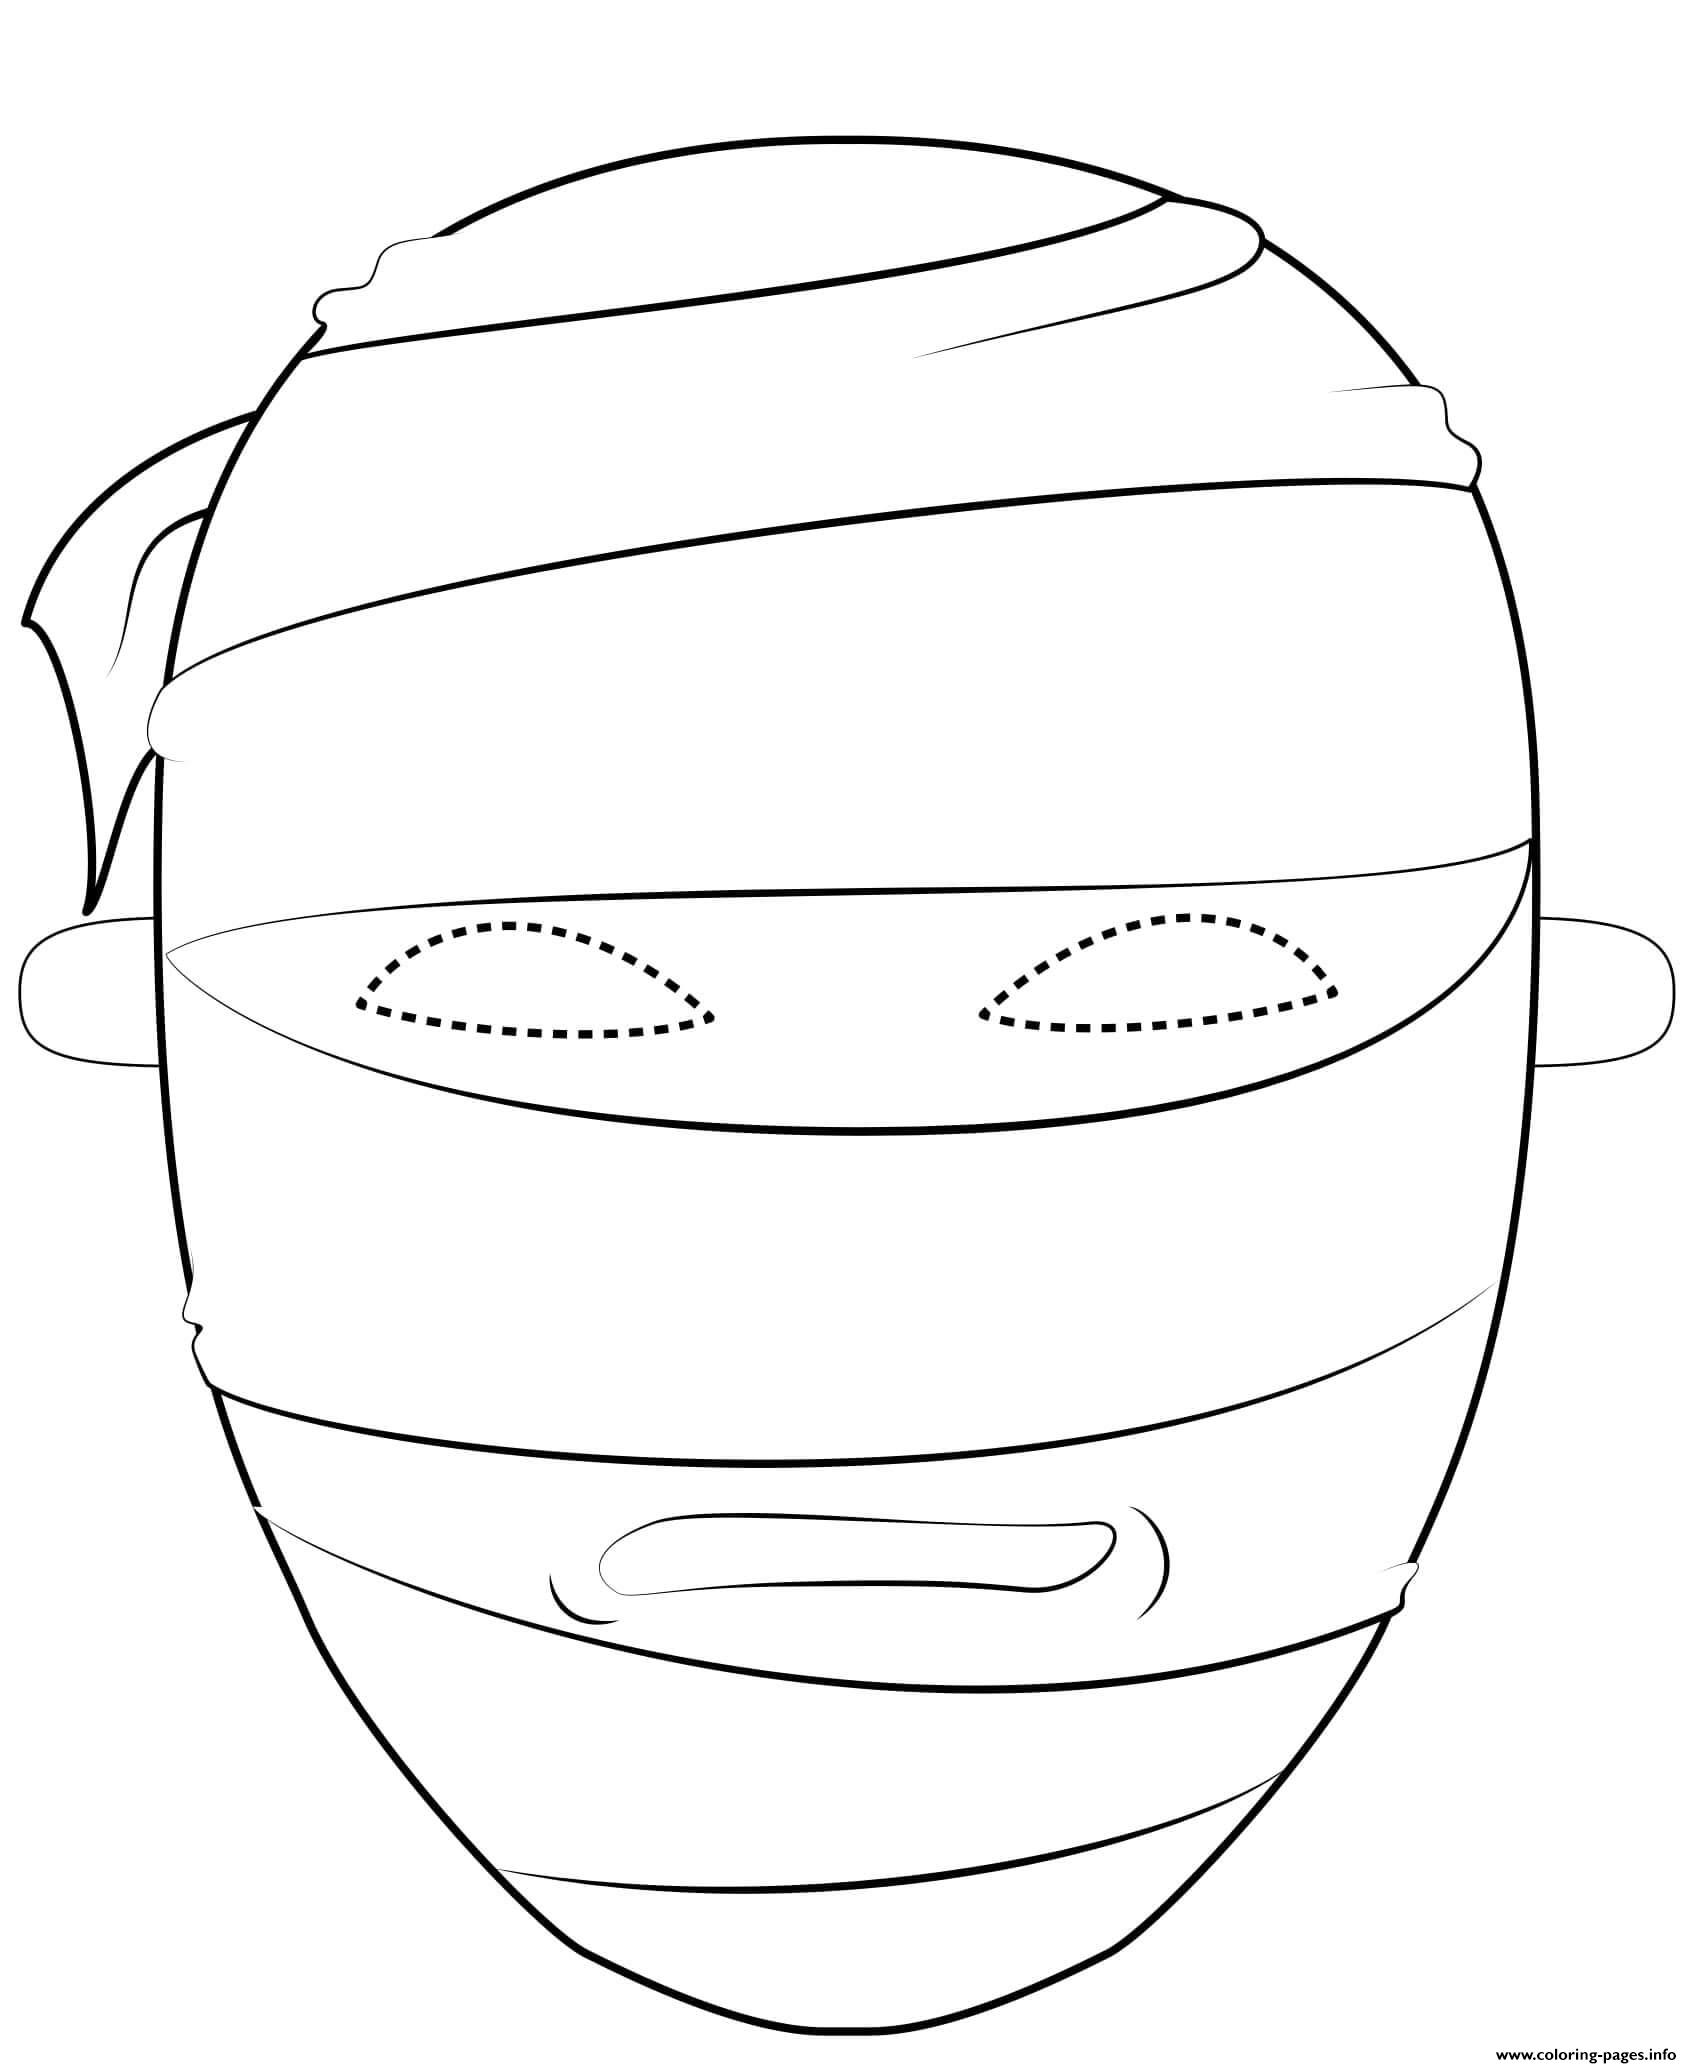 Egyptian Mummy Mask Outline Halloween coloring